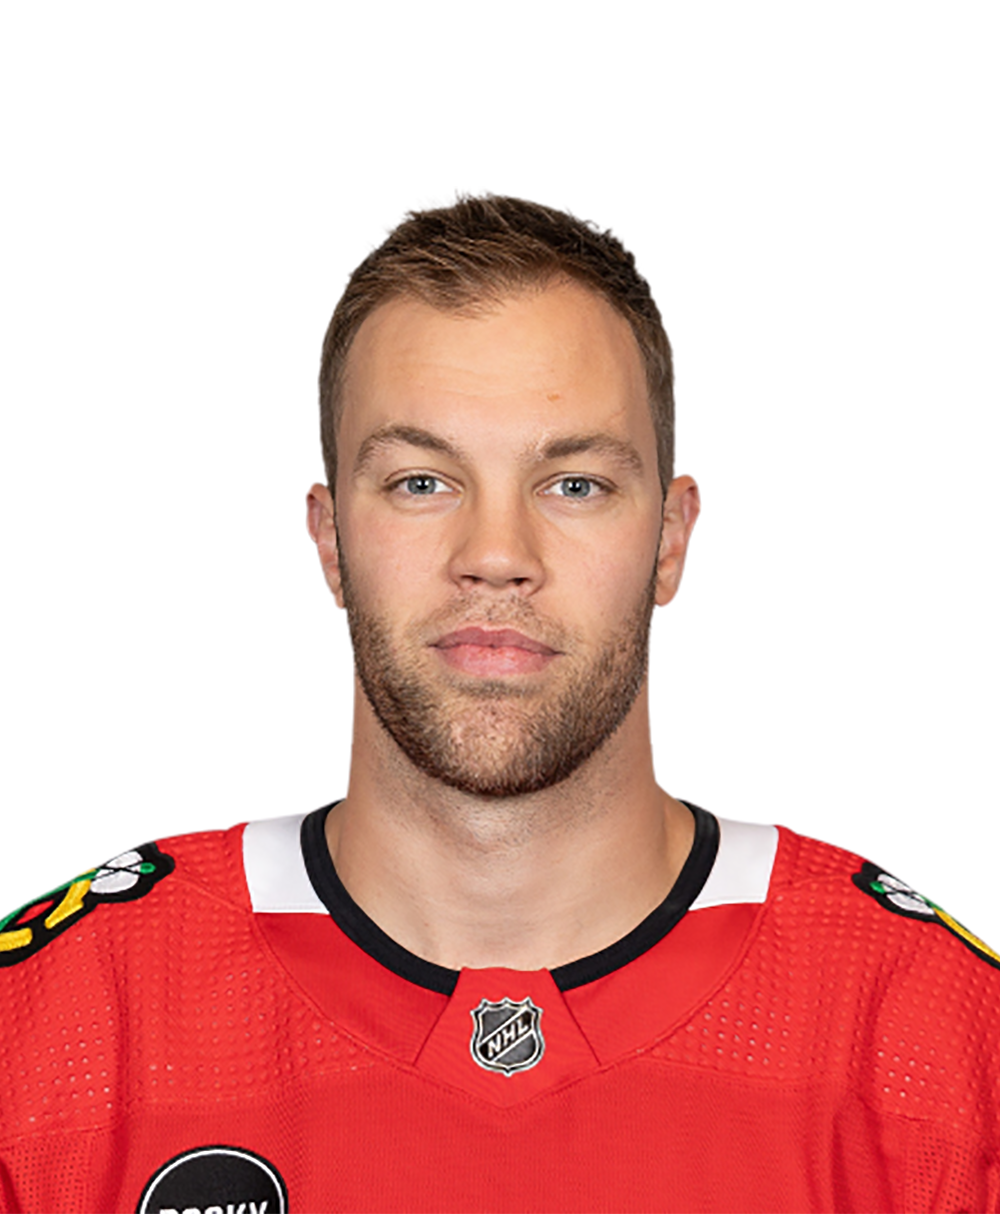 Bruins win Taylor Hall sweepstakes, acquire forward from Sabres